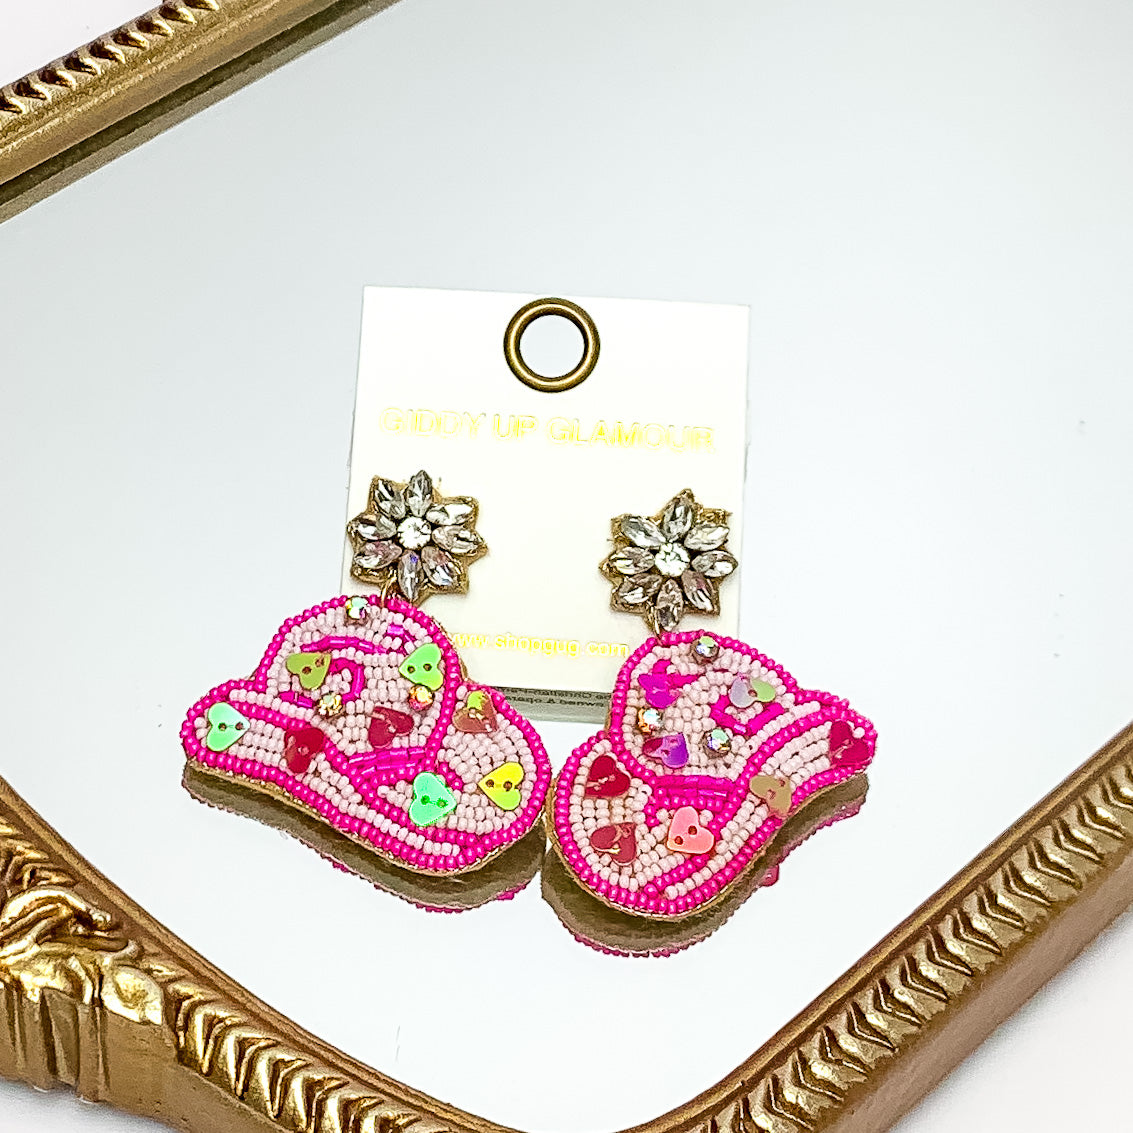 White and hot pink beaded cowboy hat earrings. Crystal flower posts. Pictured on a mirror with a gold trim. 